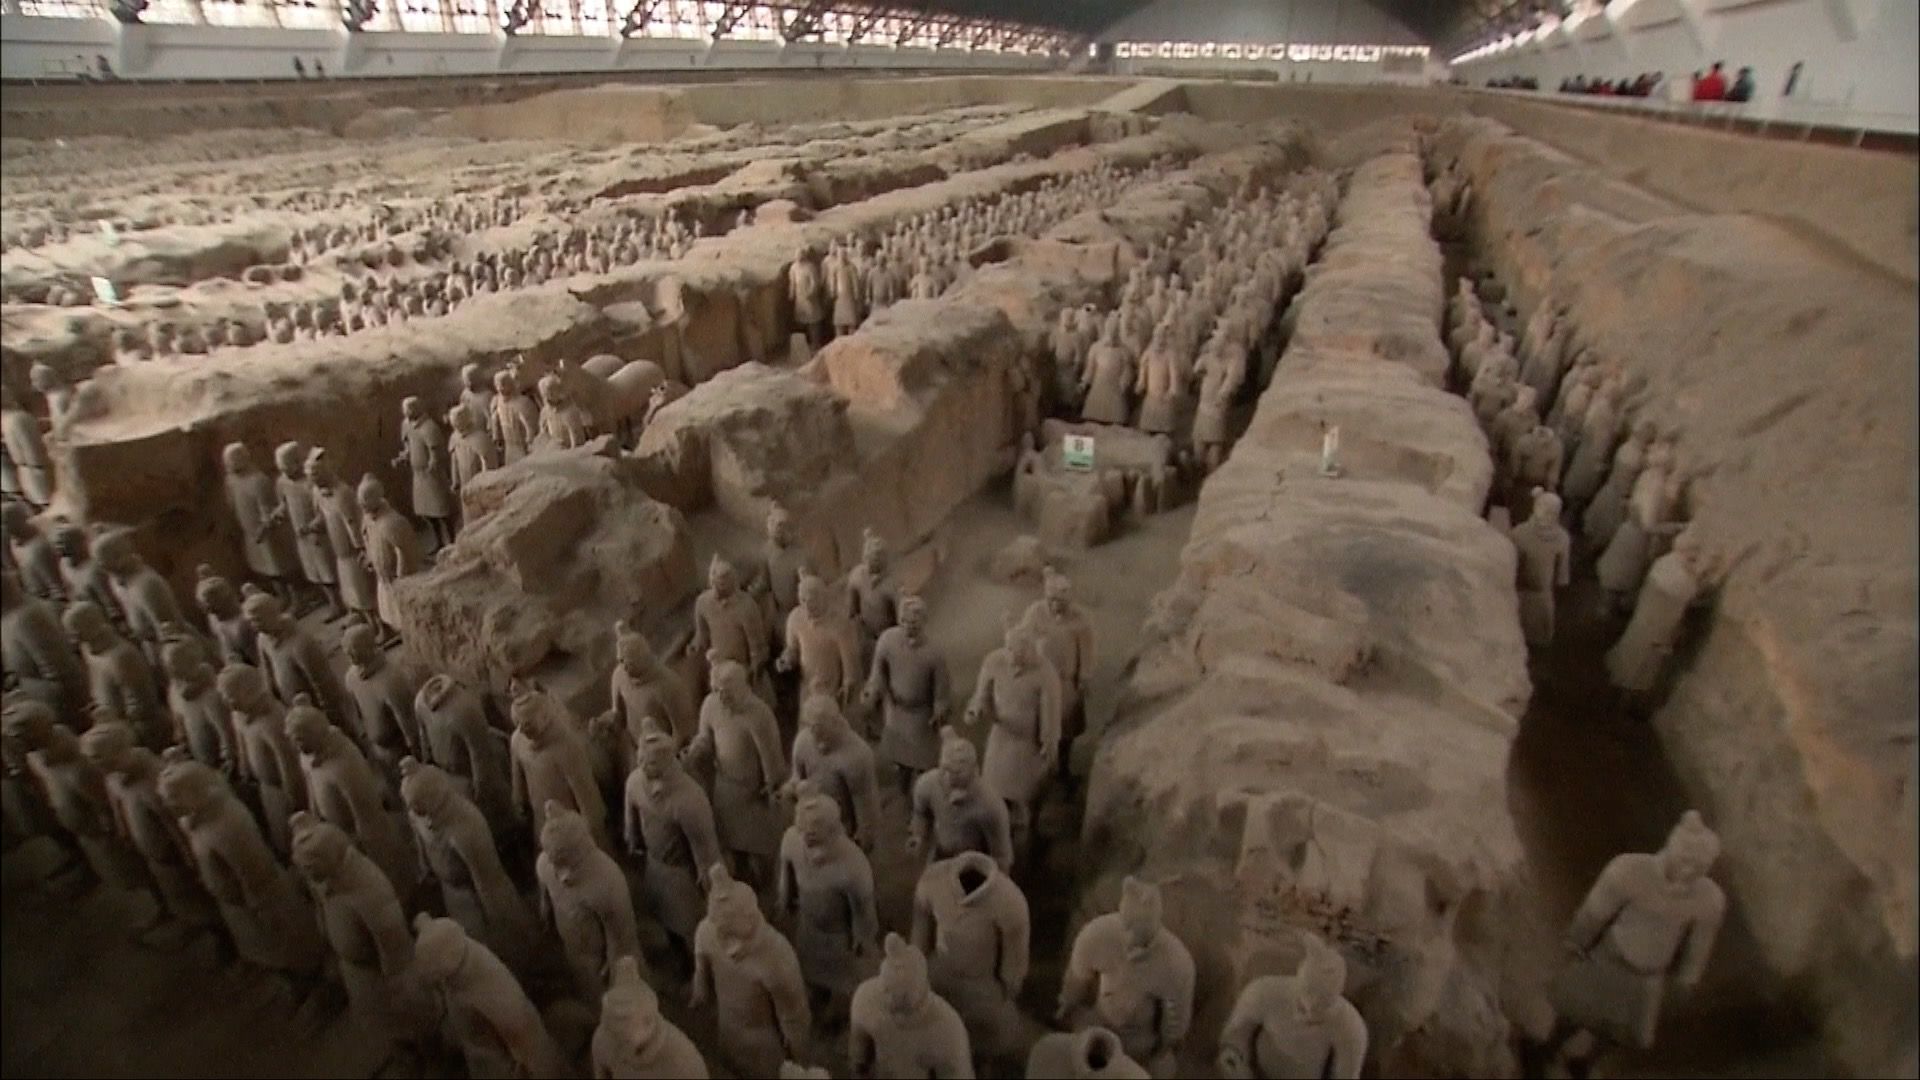 New evidence on ancient methods used to build Terracotta Army found